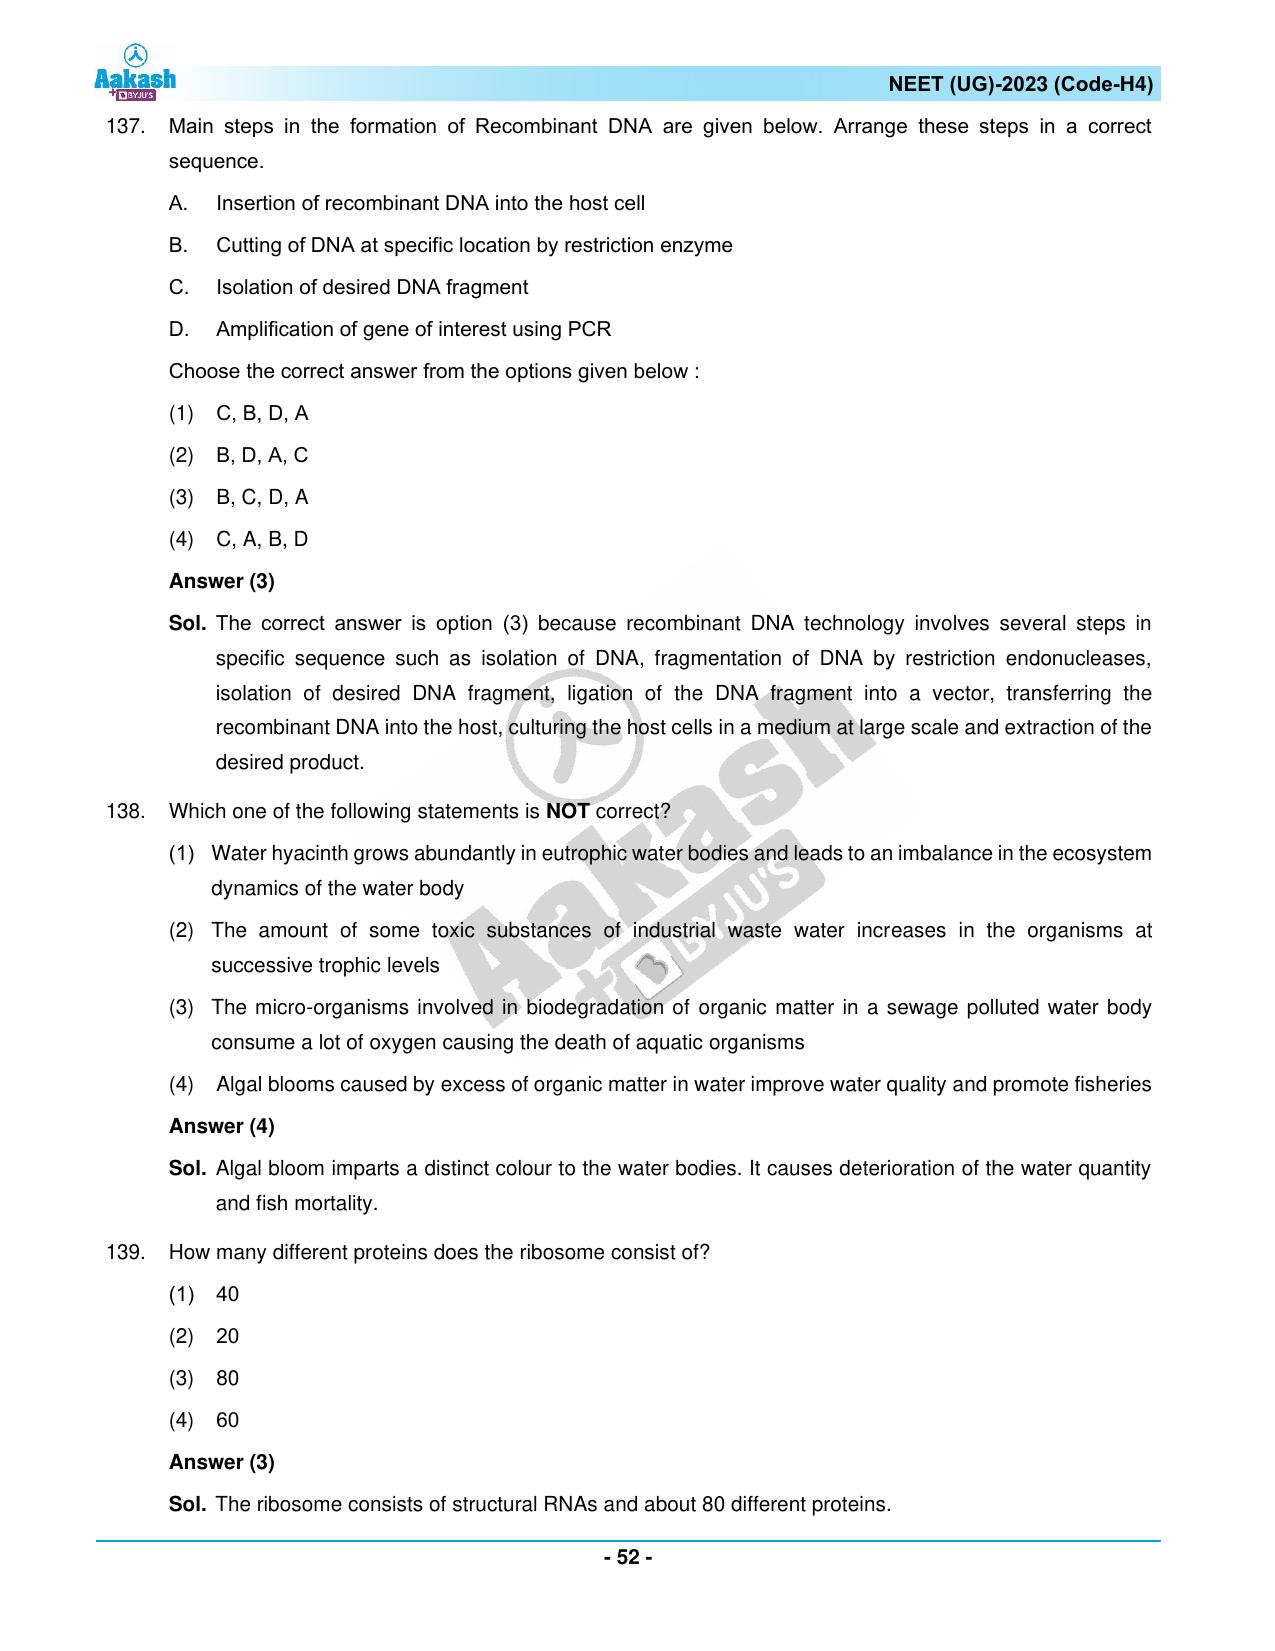 NEET 2023 Question Paper H4 - Page 52